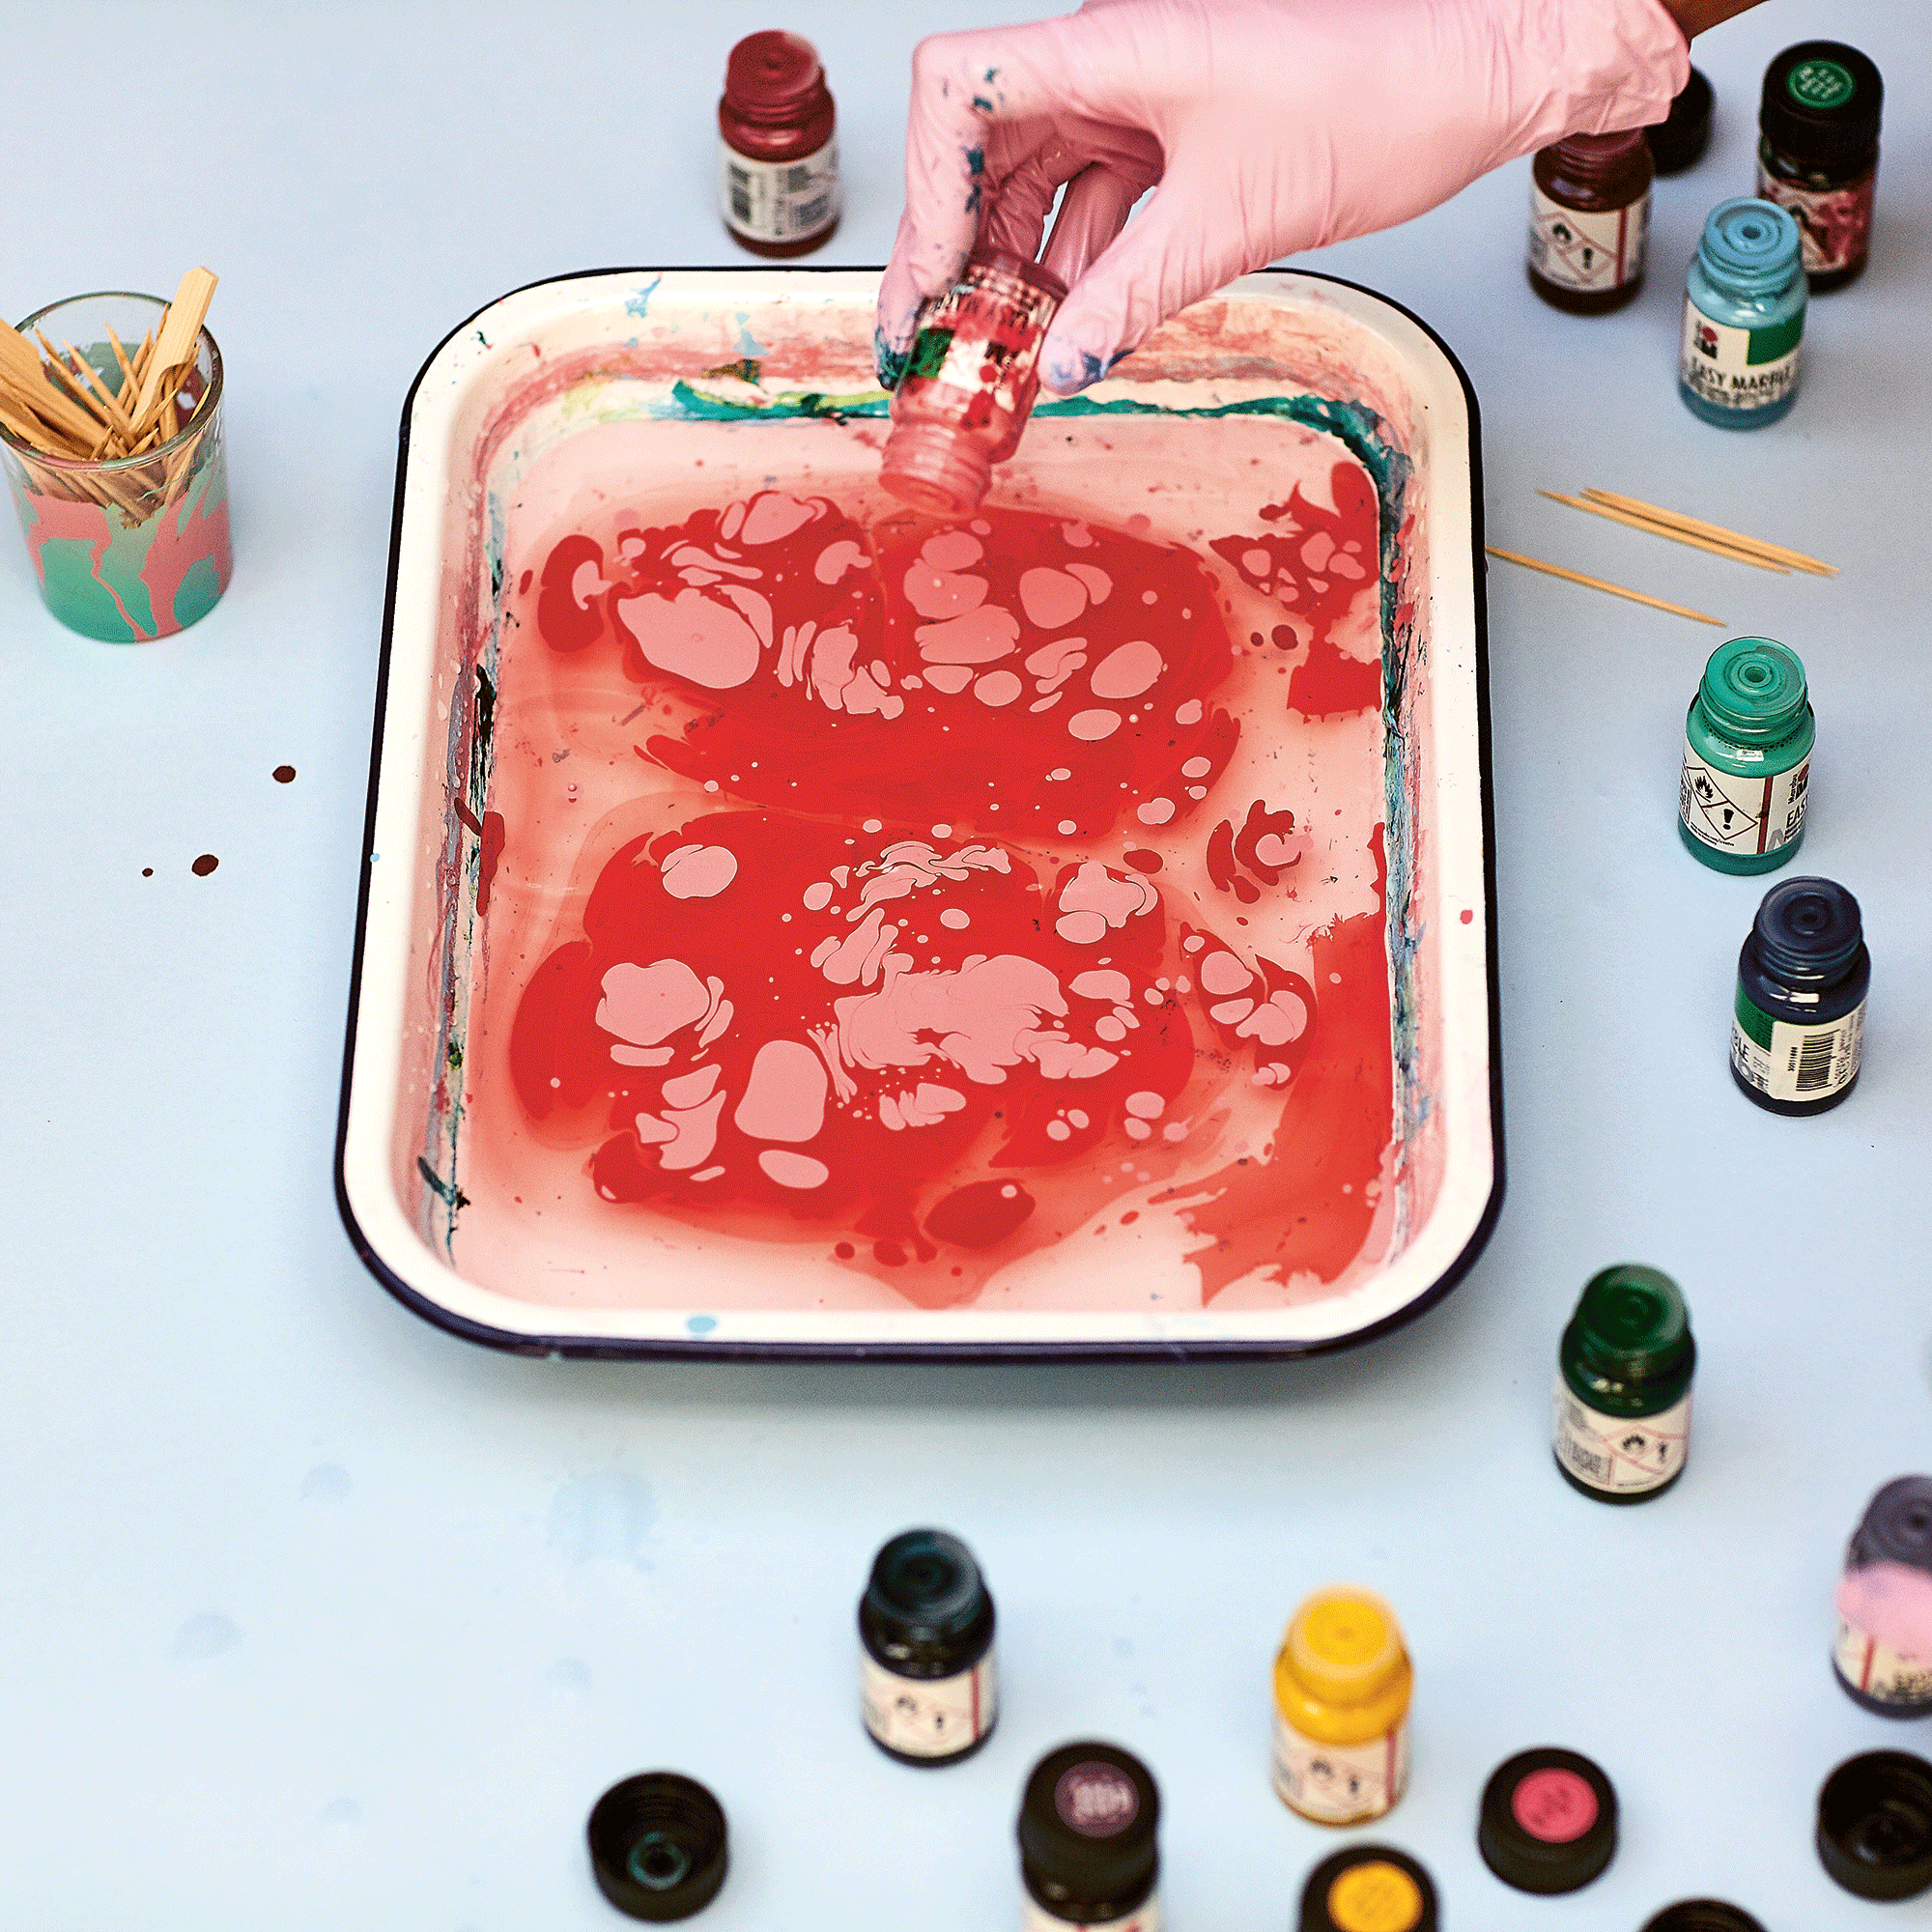 Pink inks in a water bath